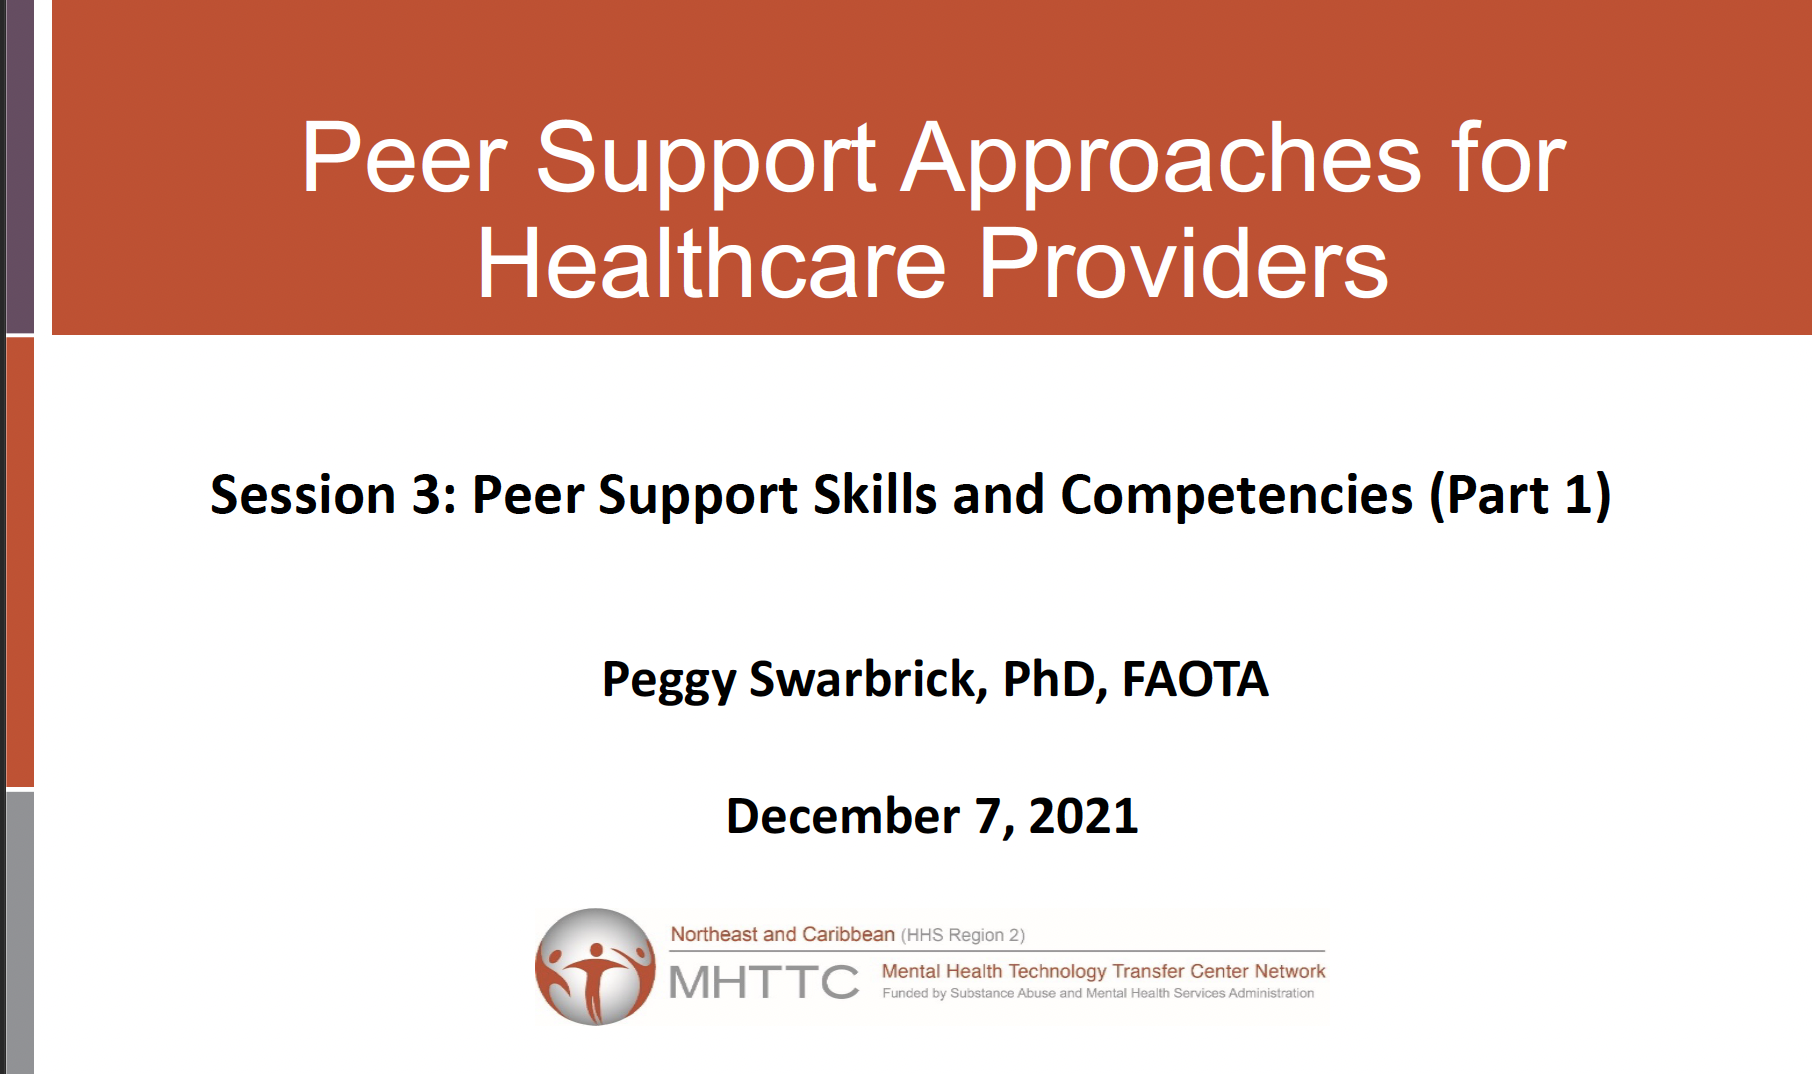 Peer Support Approaches for Healthcare Providers Session 3: Peer Support Skills and Competencies, Part 1